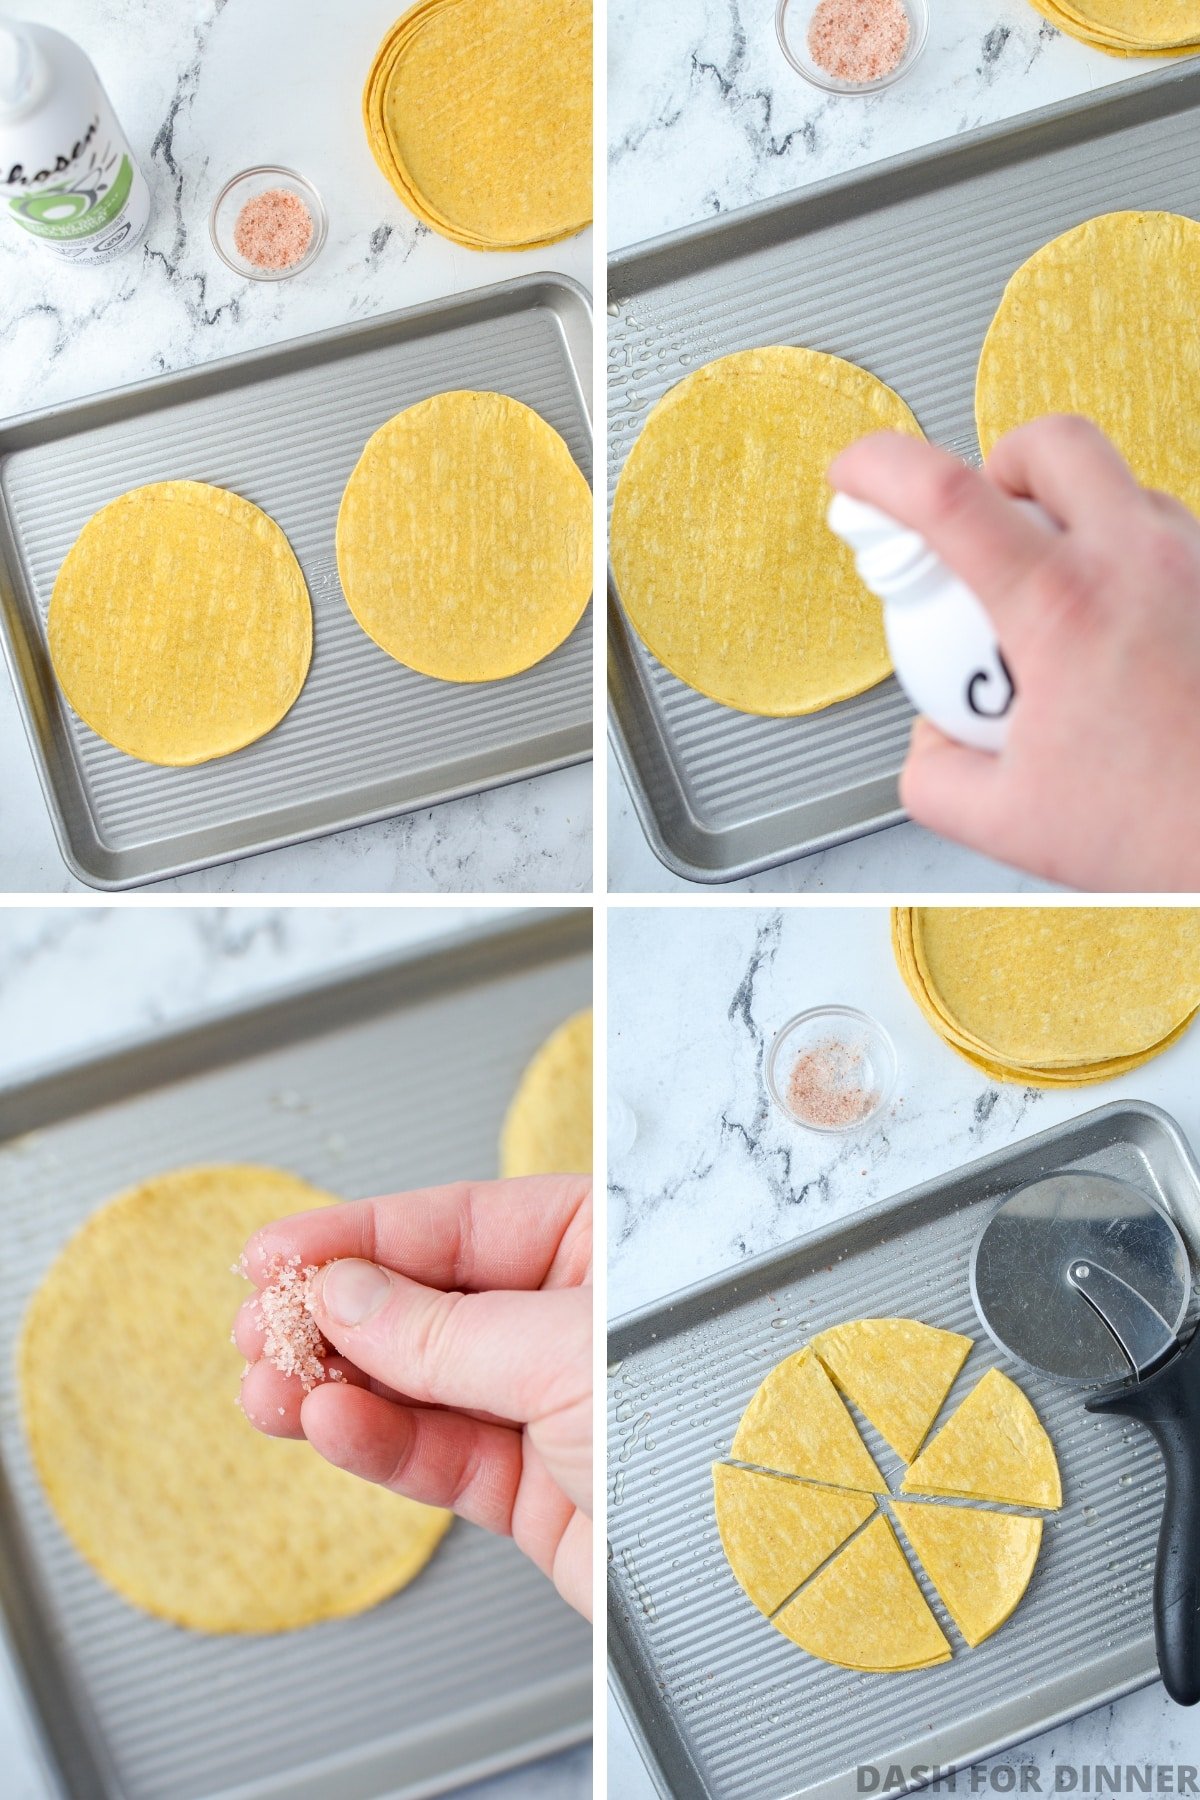 Spraying corn tortillas with cooking spray, sprinkling with salt, and cutting into triangles.